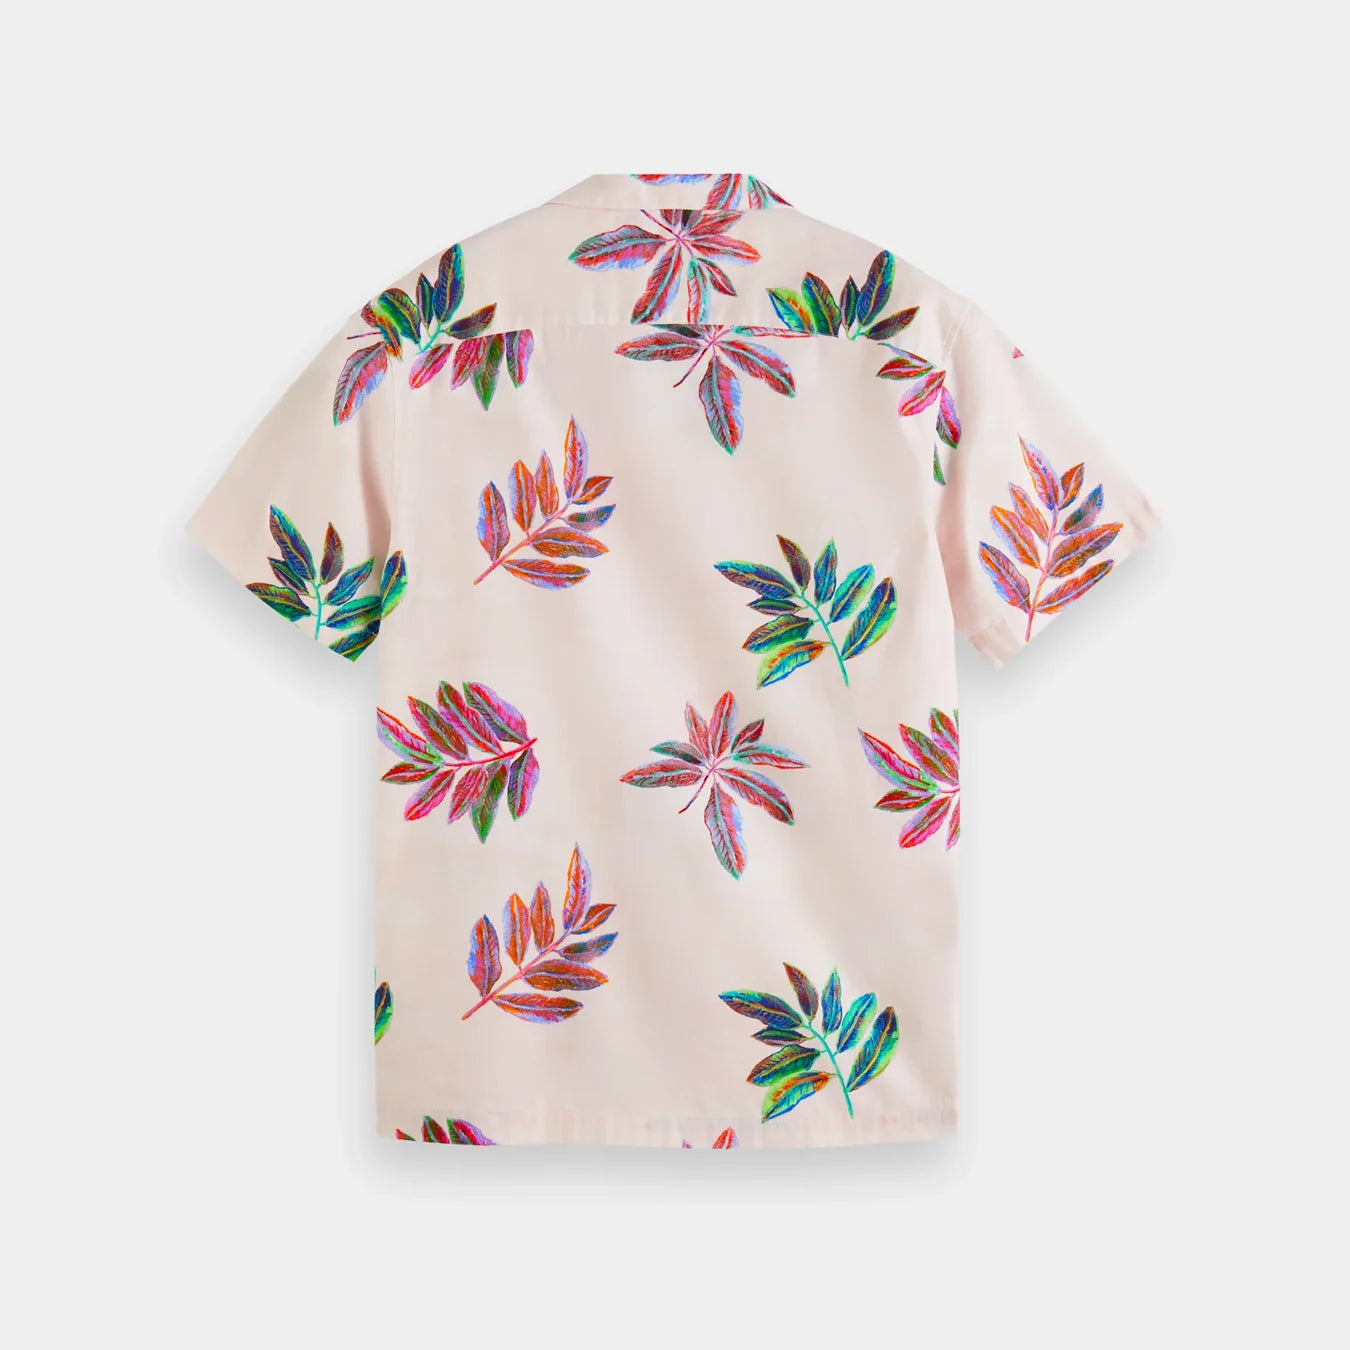 'Scotch & Soda Festival Flowers Short Sleeve Camp Shirt' in 'Pink' colour